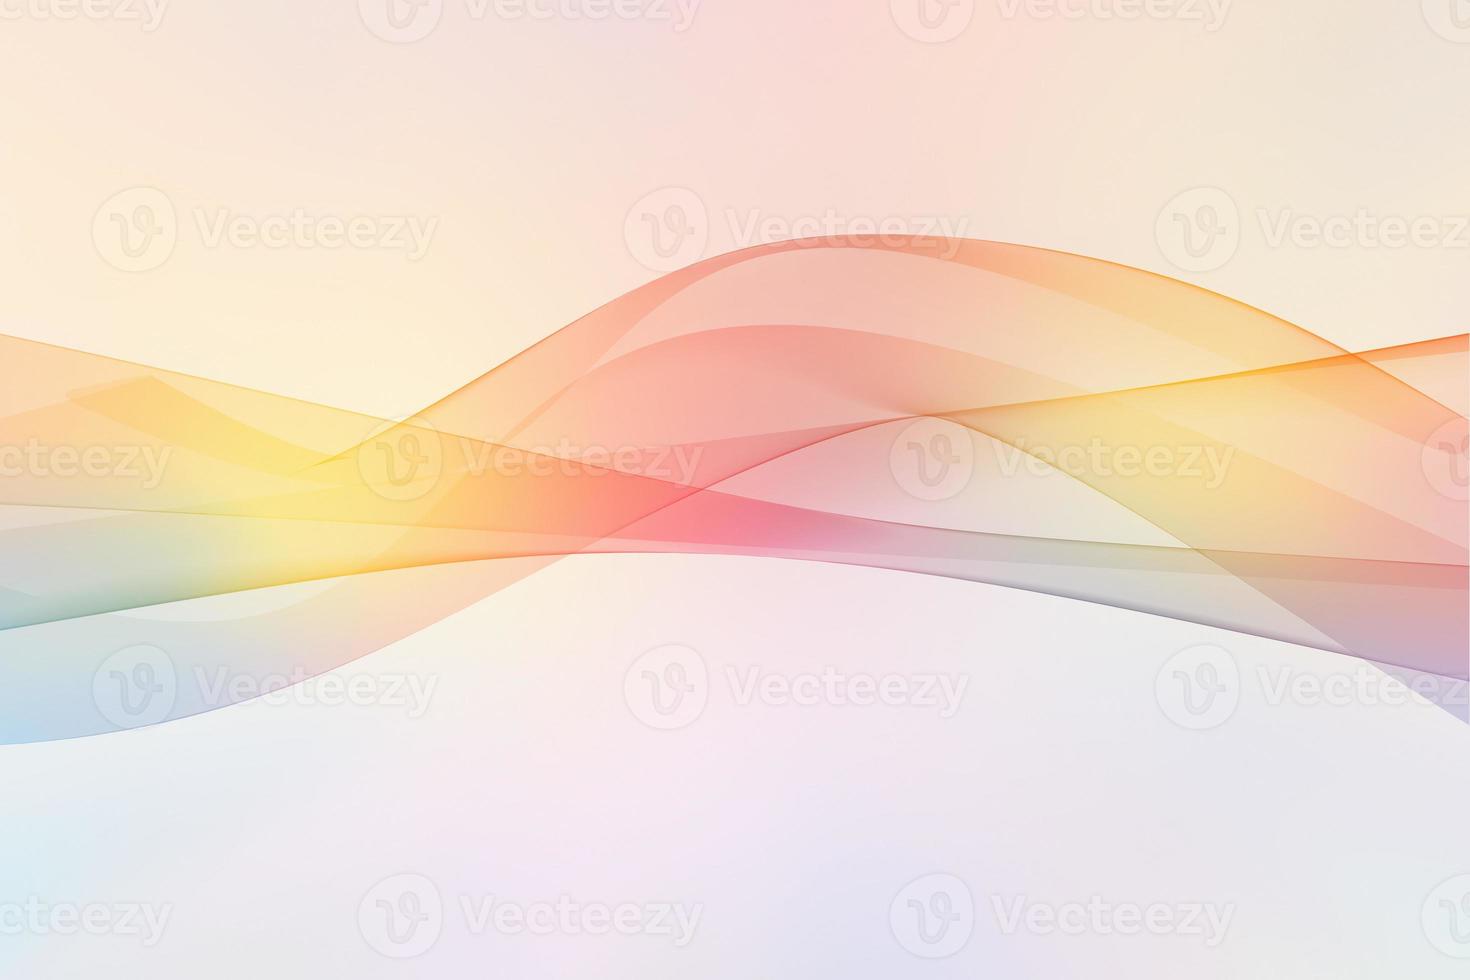 Tender smooth wavy surface design 3d illustration. Abstract liquid gradient wave background in technology and futuristic style photo